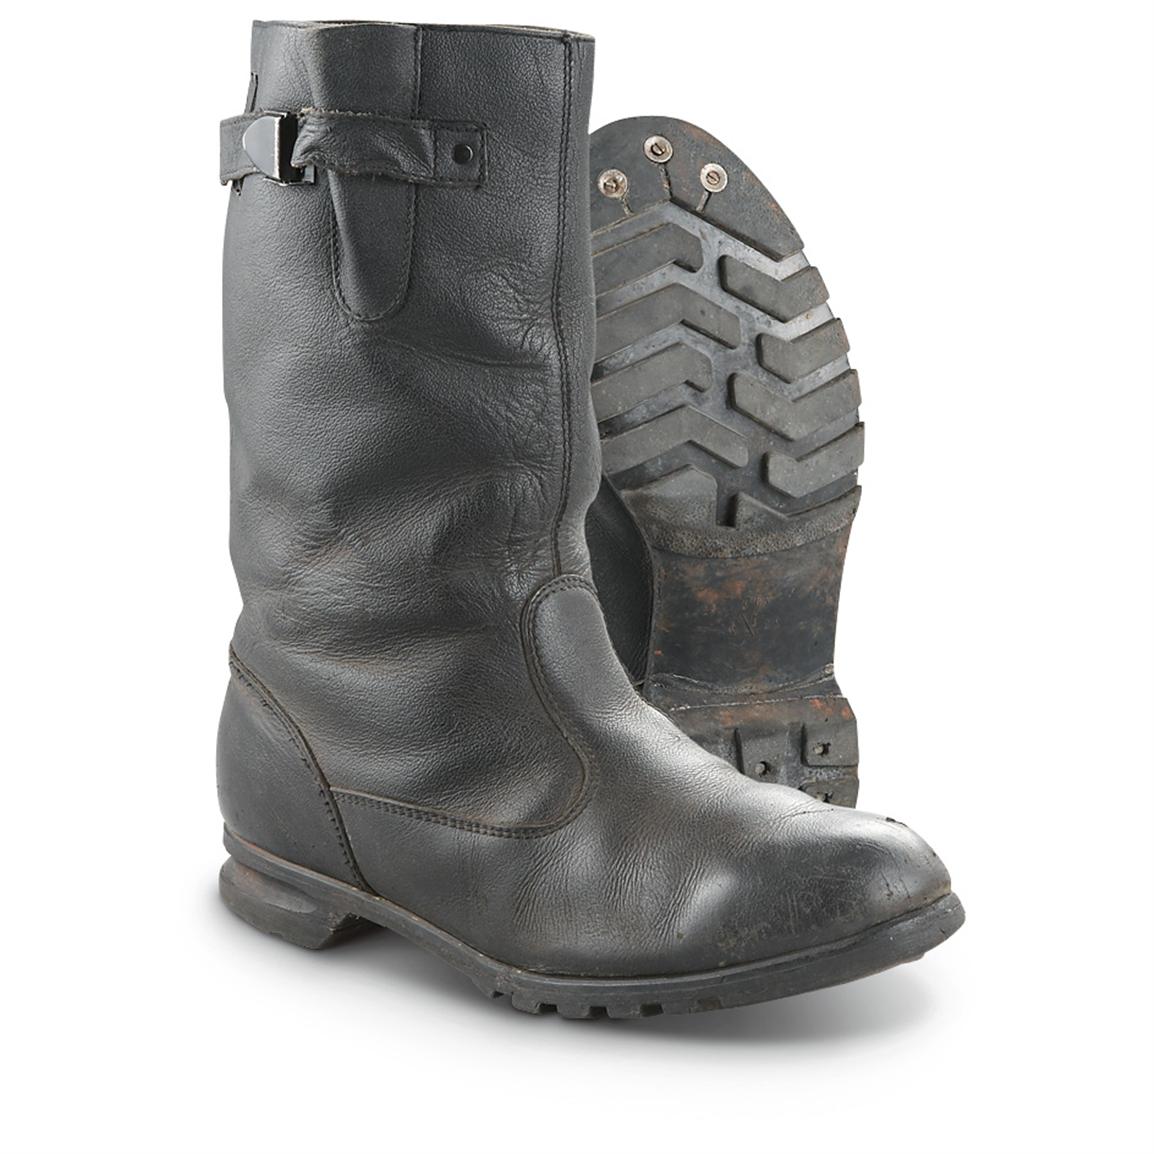 Used Czech Military Surplus Leather Boots, Black - 293895, Combat ...